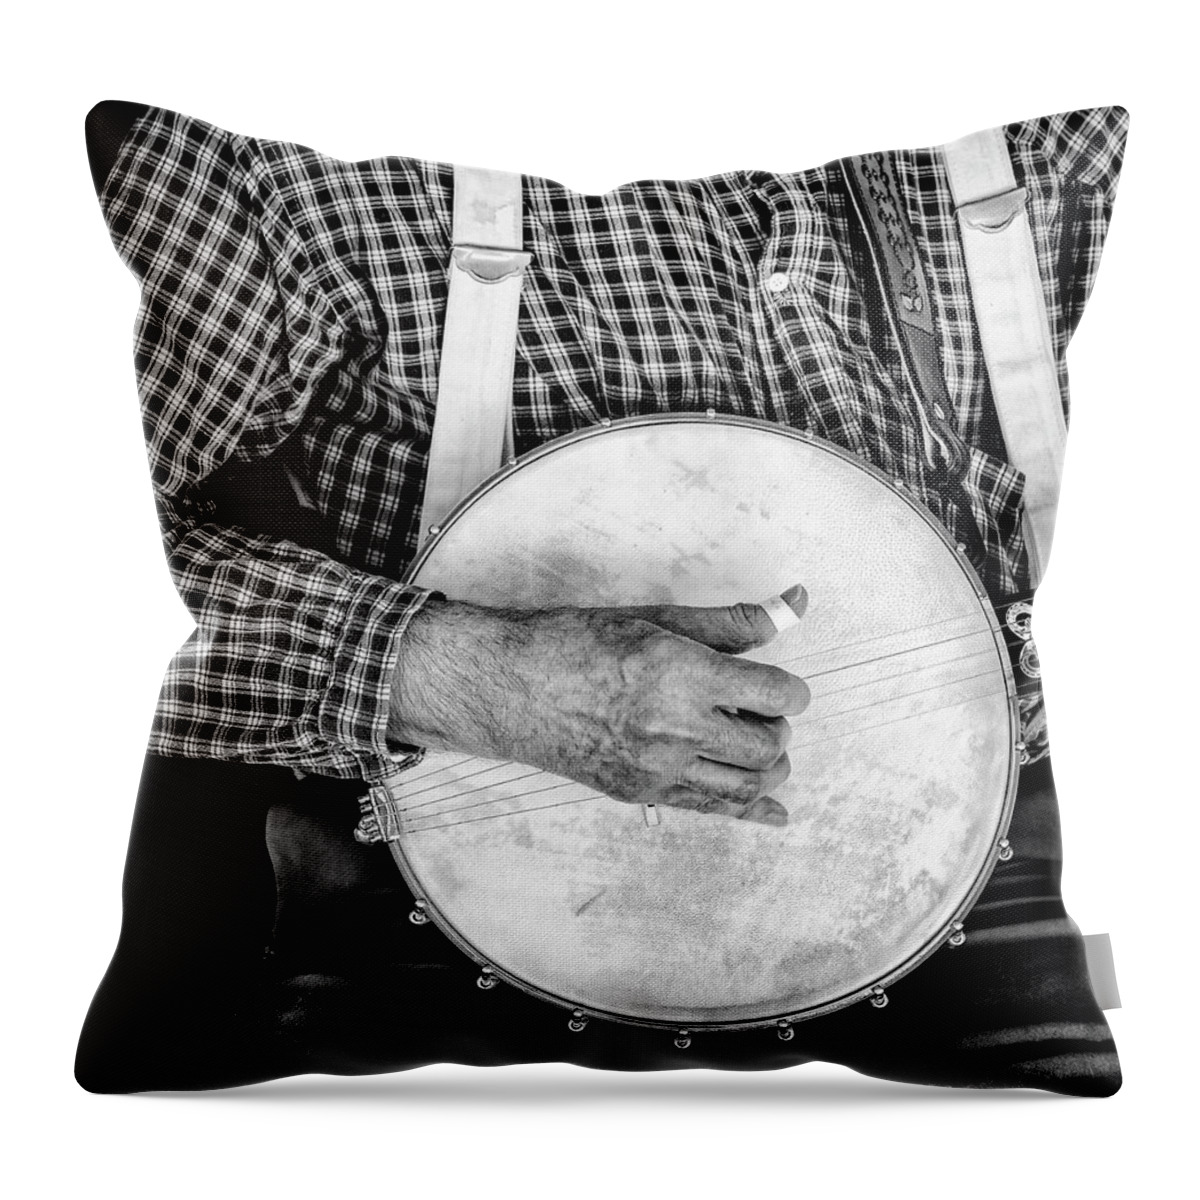 Banjo Throw Pillow featuring the photograph Banjo Hand by Gary Slawsky